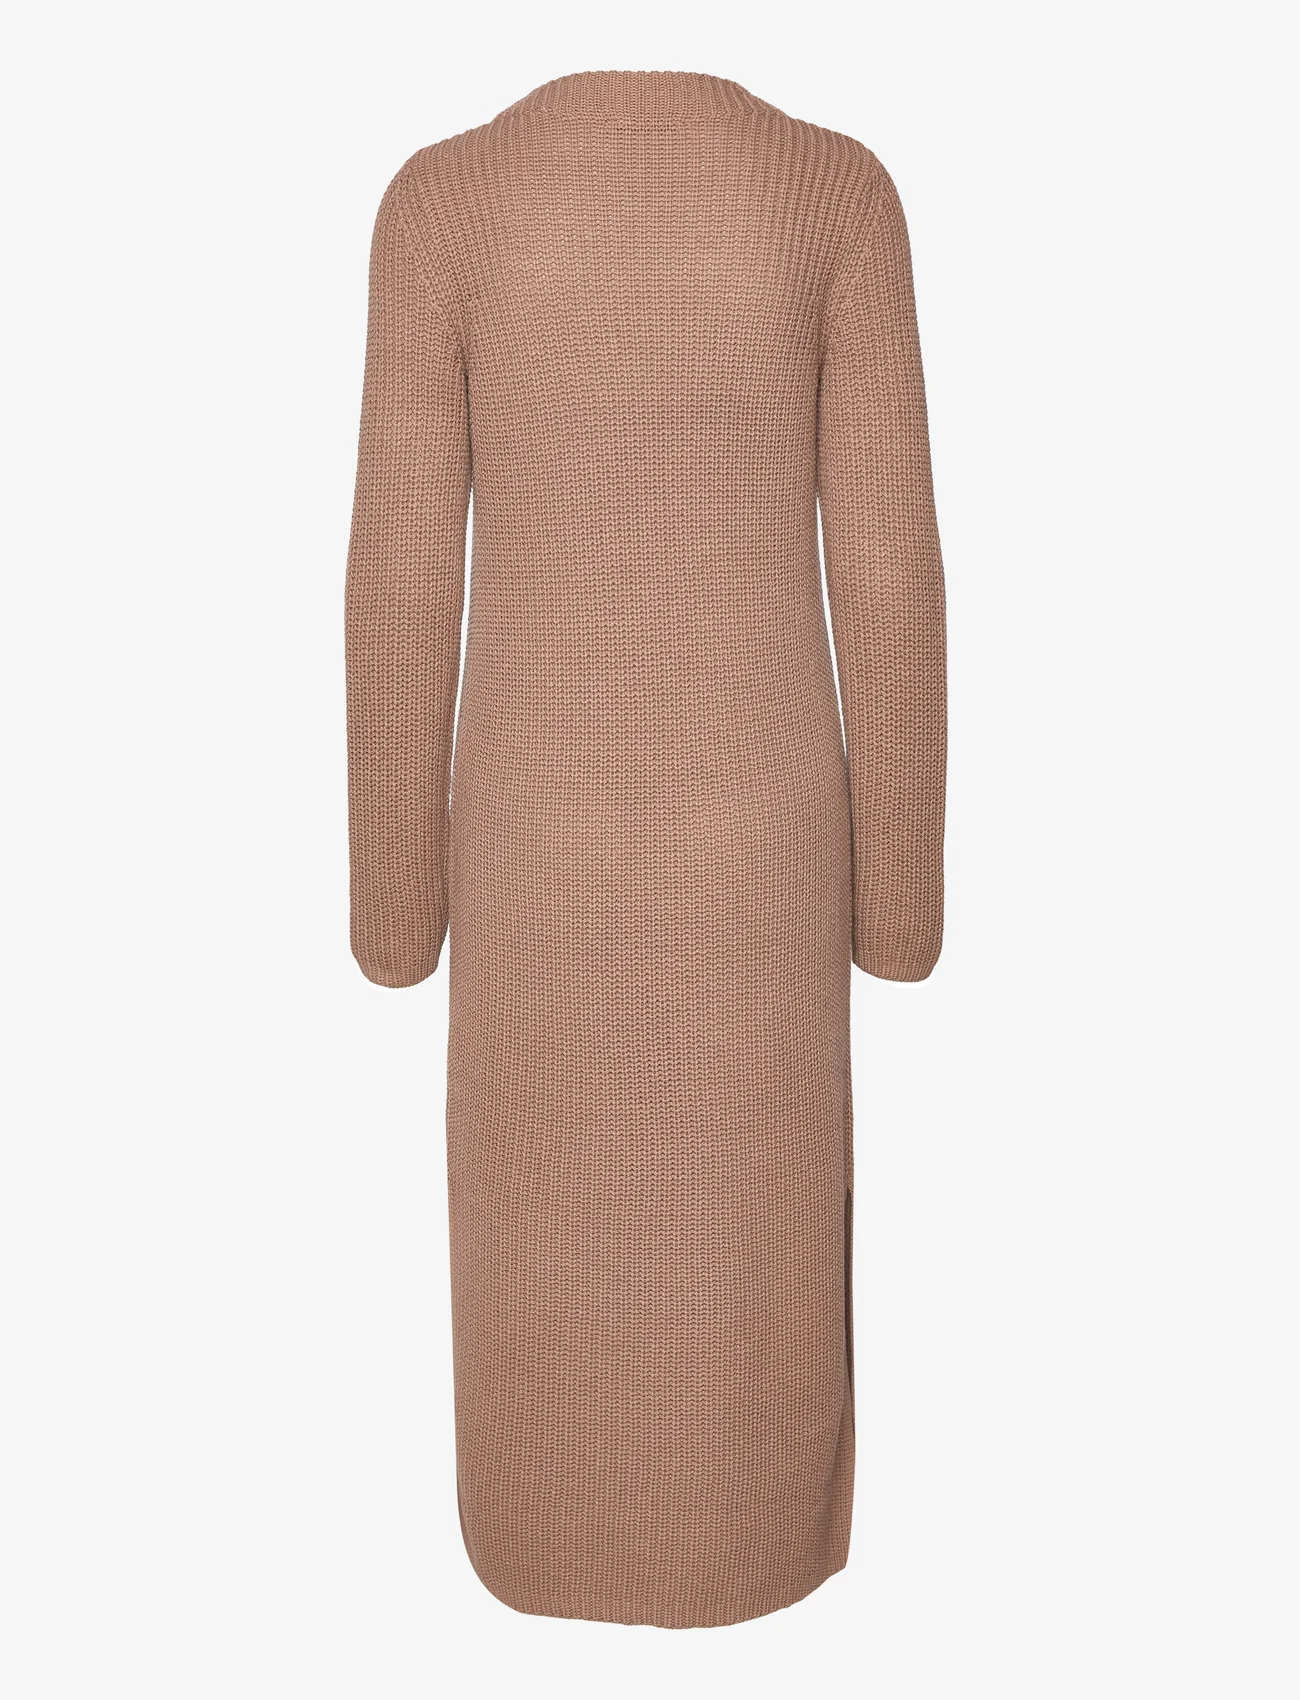 Esprit Casual - Knitted dress - strikkjoler - taupe 5 - 1